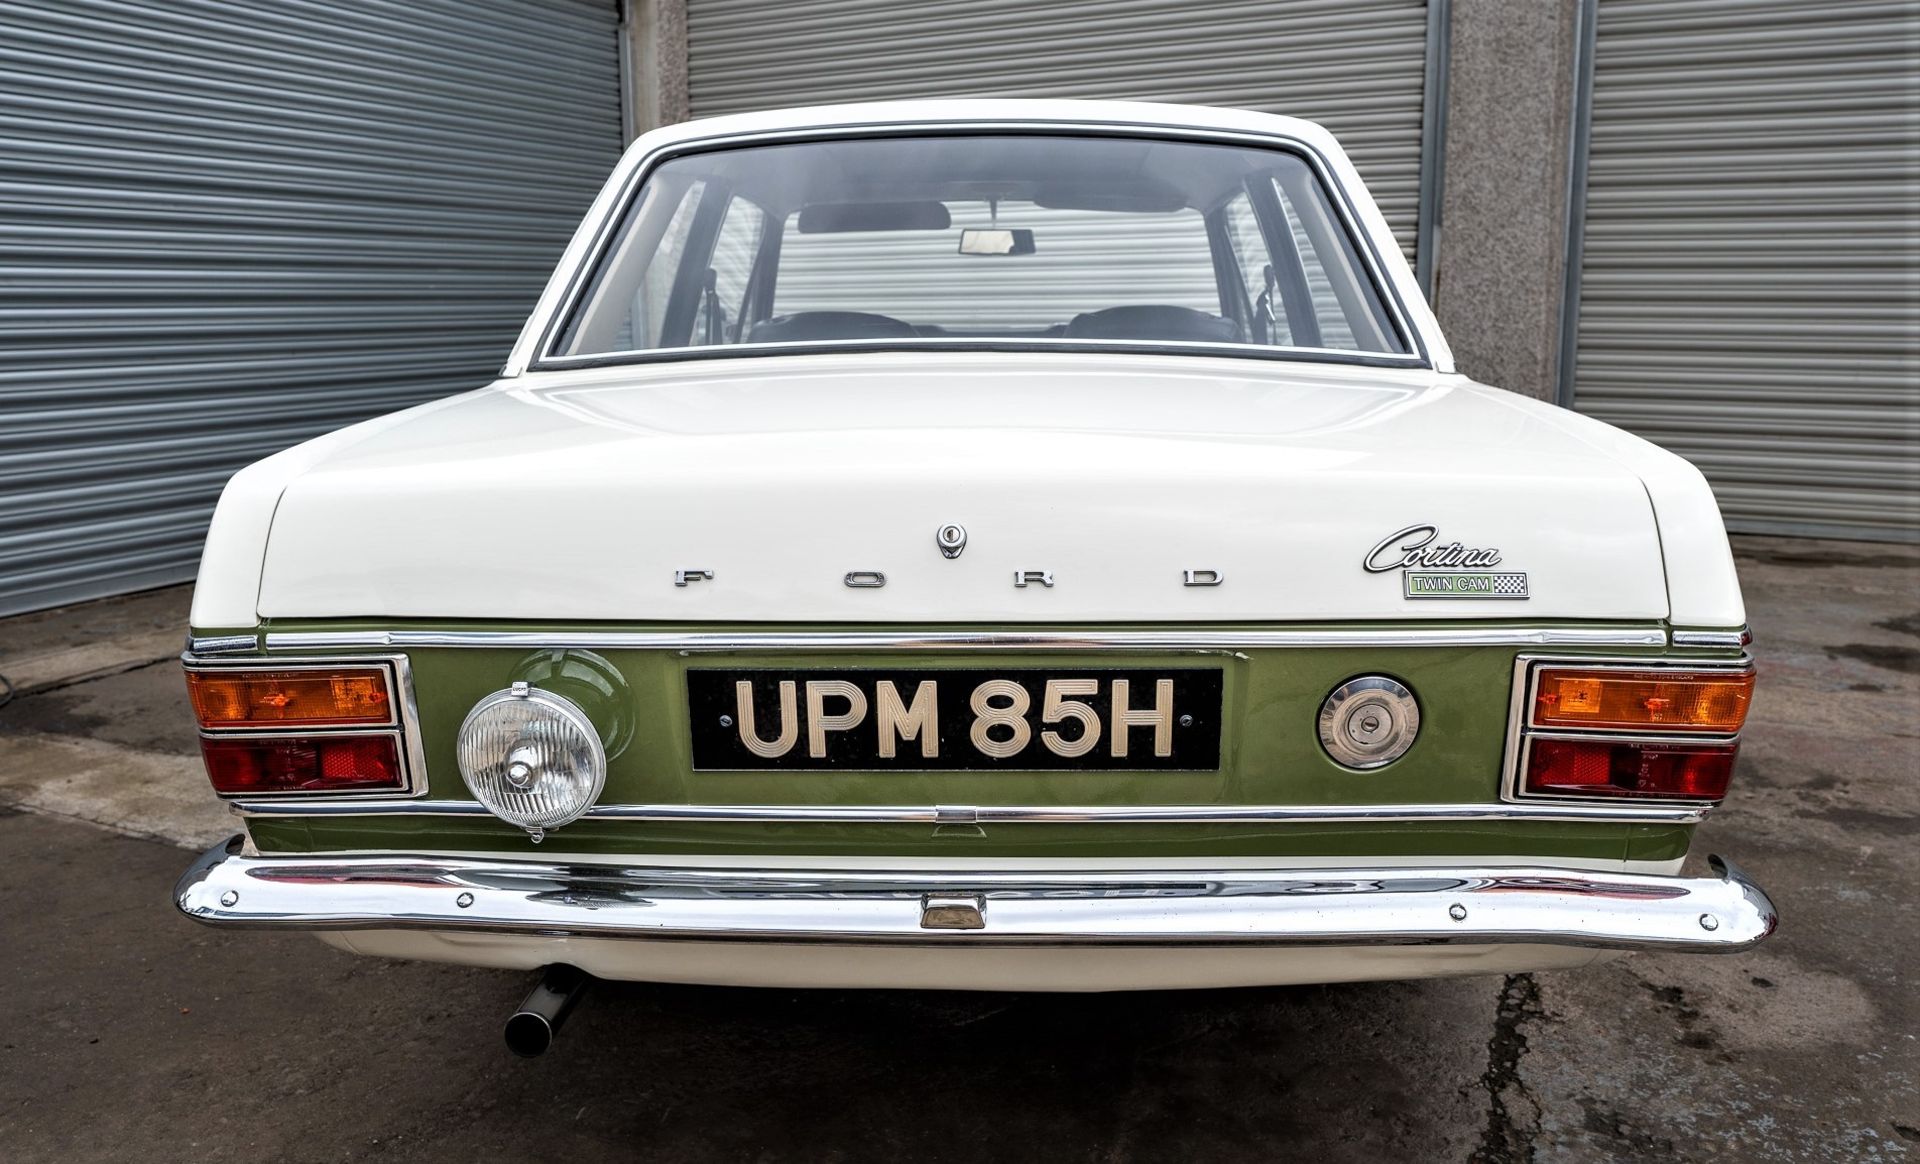 1970 FORD CORTINA LOTUS Chassis Number: BA91HS25847 Registration Number: UPM 85H - Ex-East Sussex - Image 5 of 16